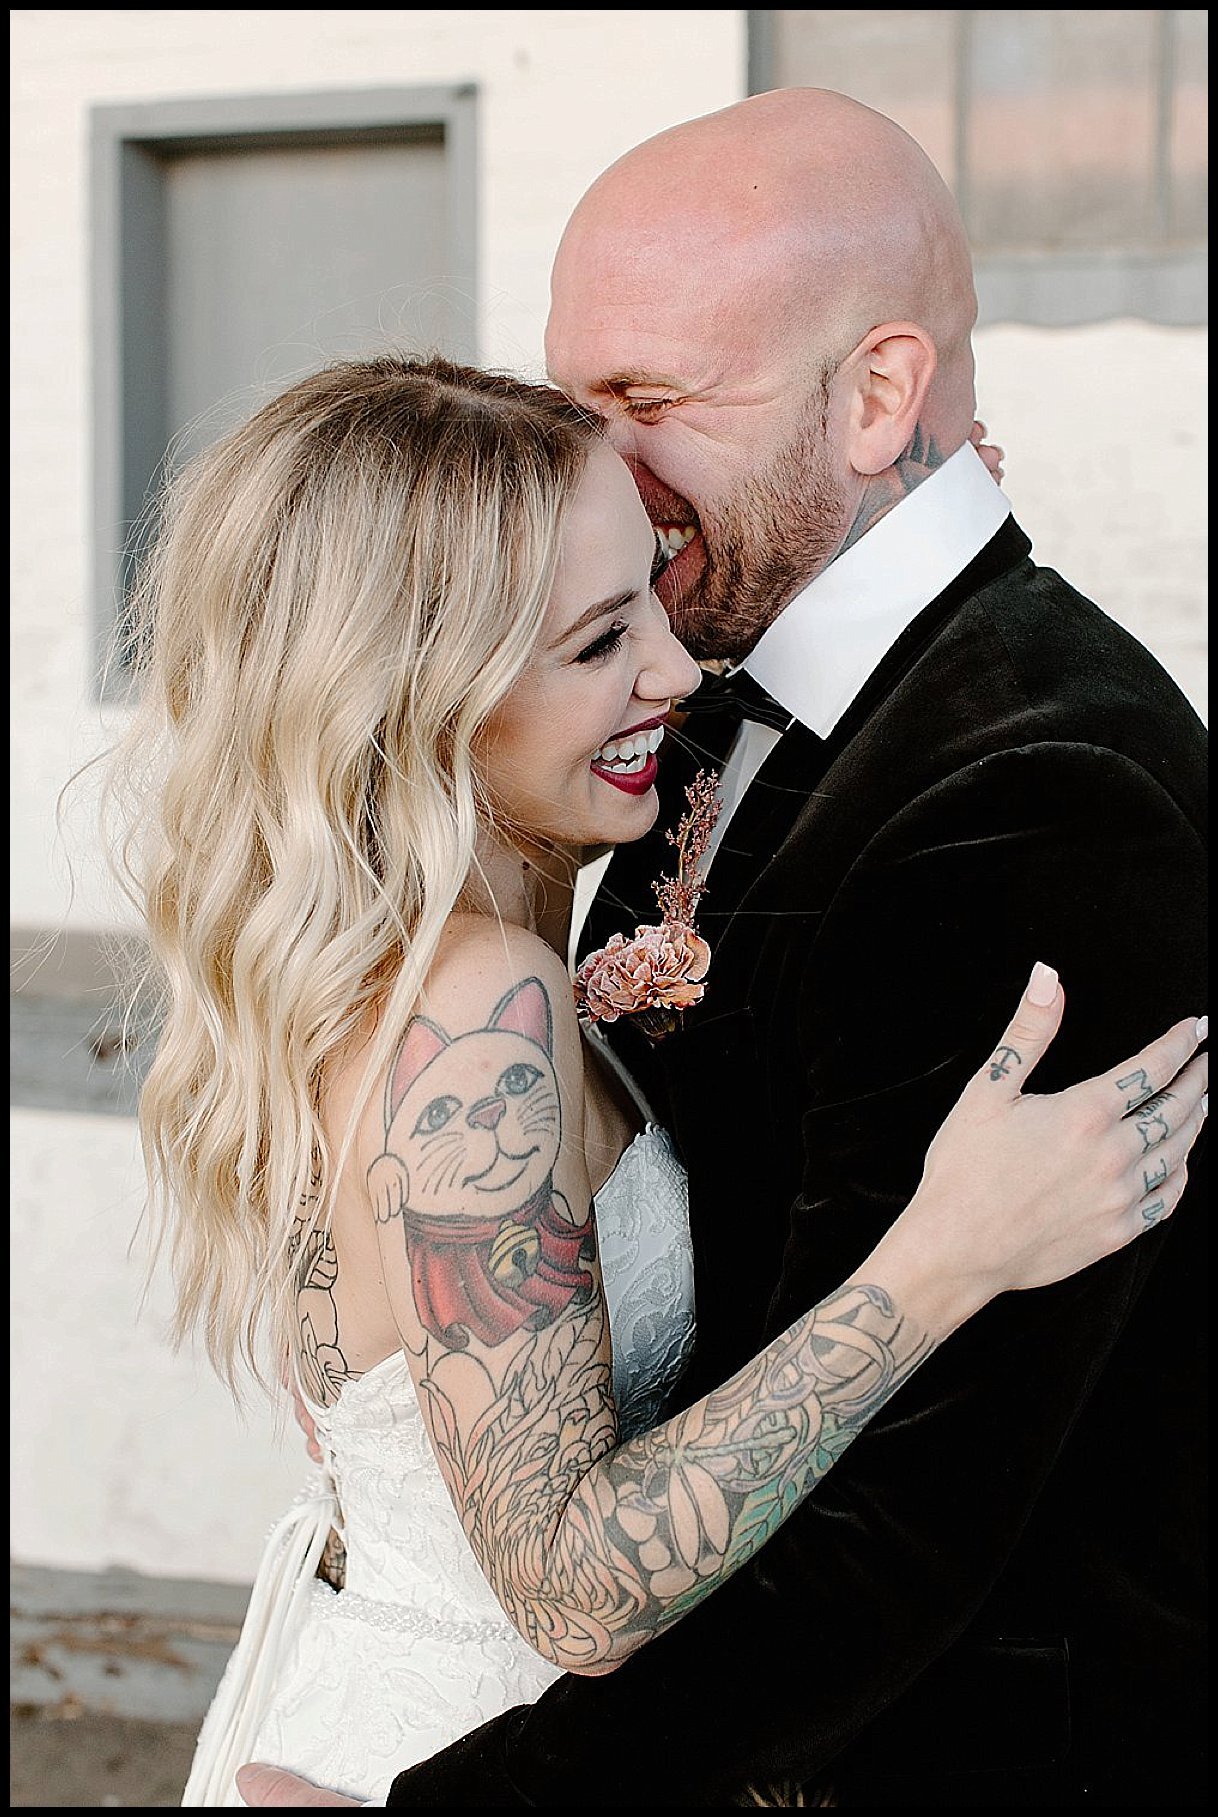 An edgy and alternative bride with tattoos and her groom in a velvet black tuxedo outside Detroit’s The Whiskey Factory. The bride and groom laugh during their wedding photos.